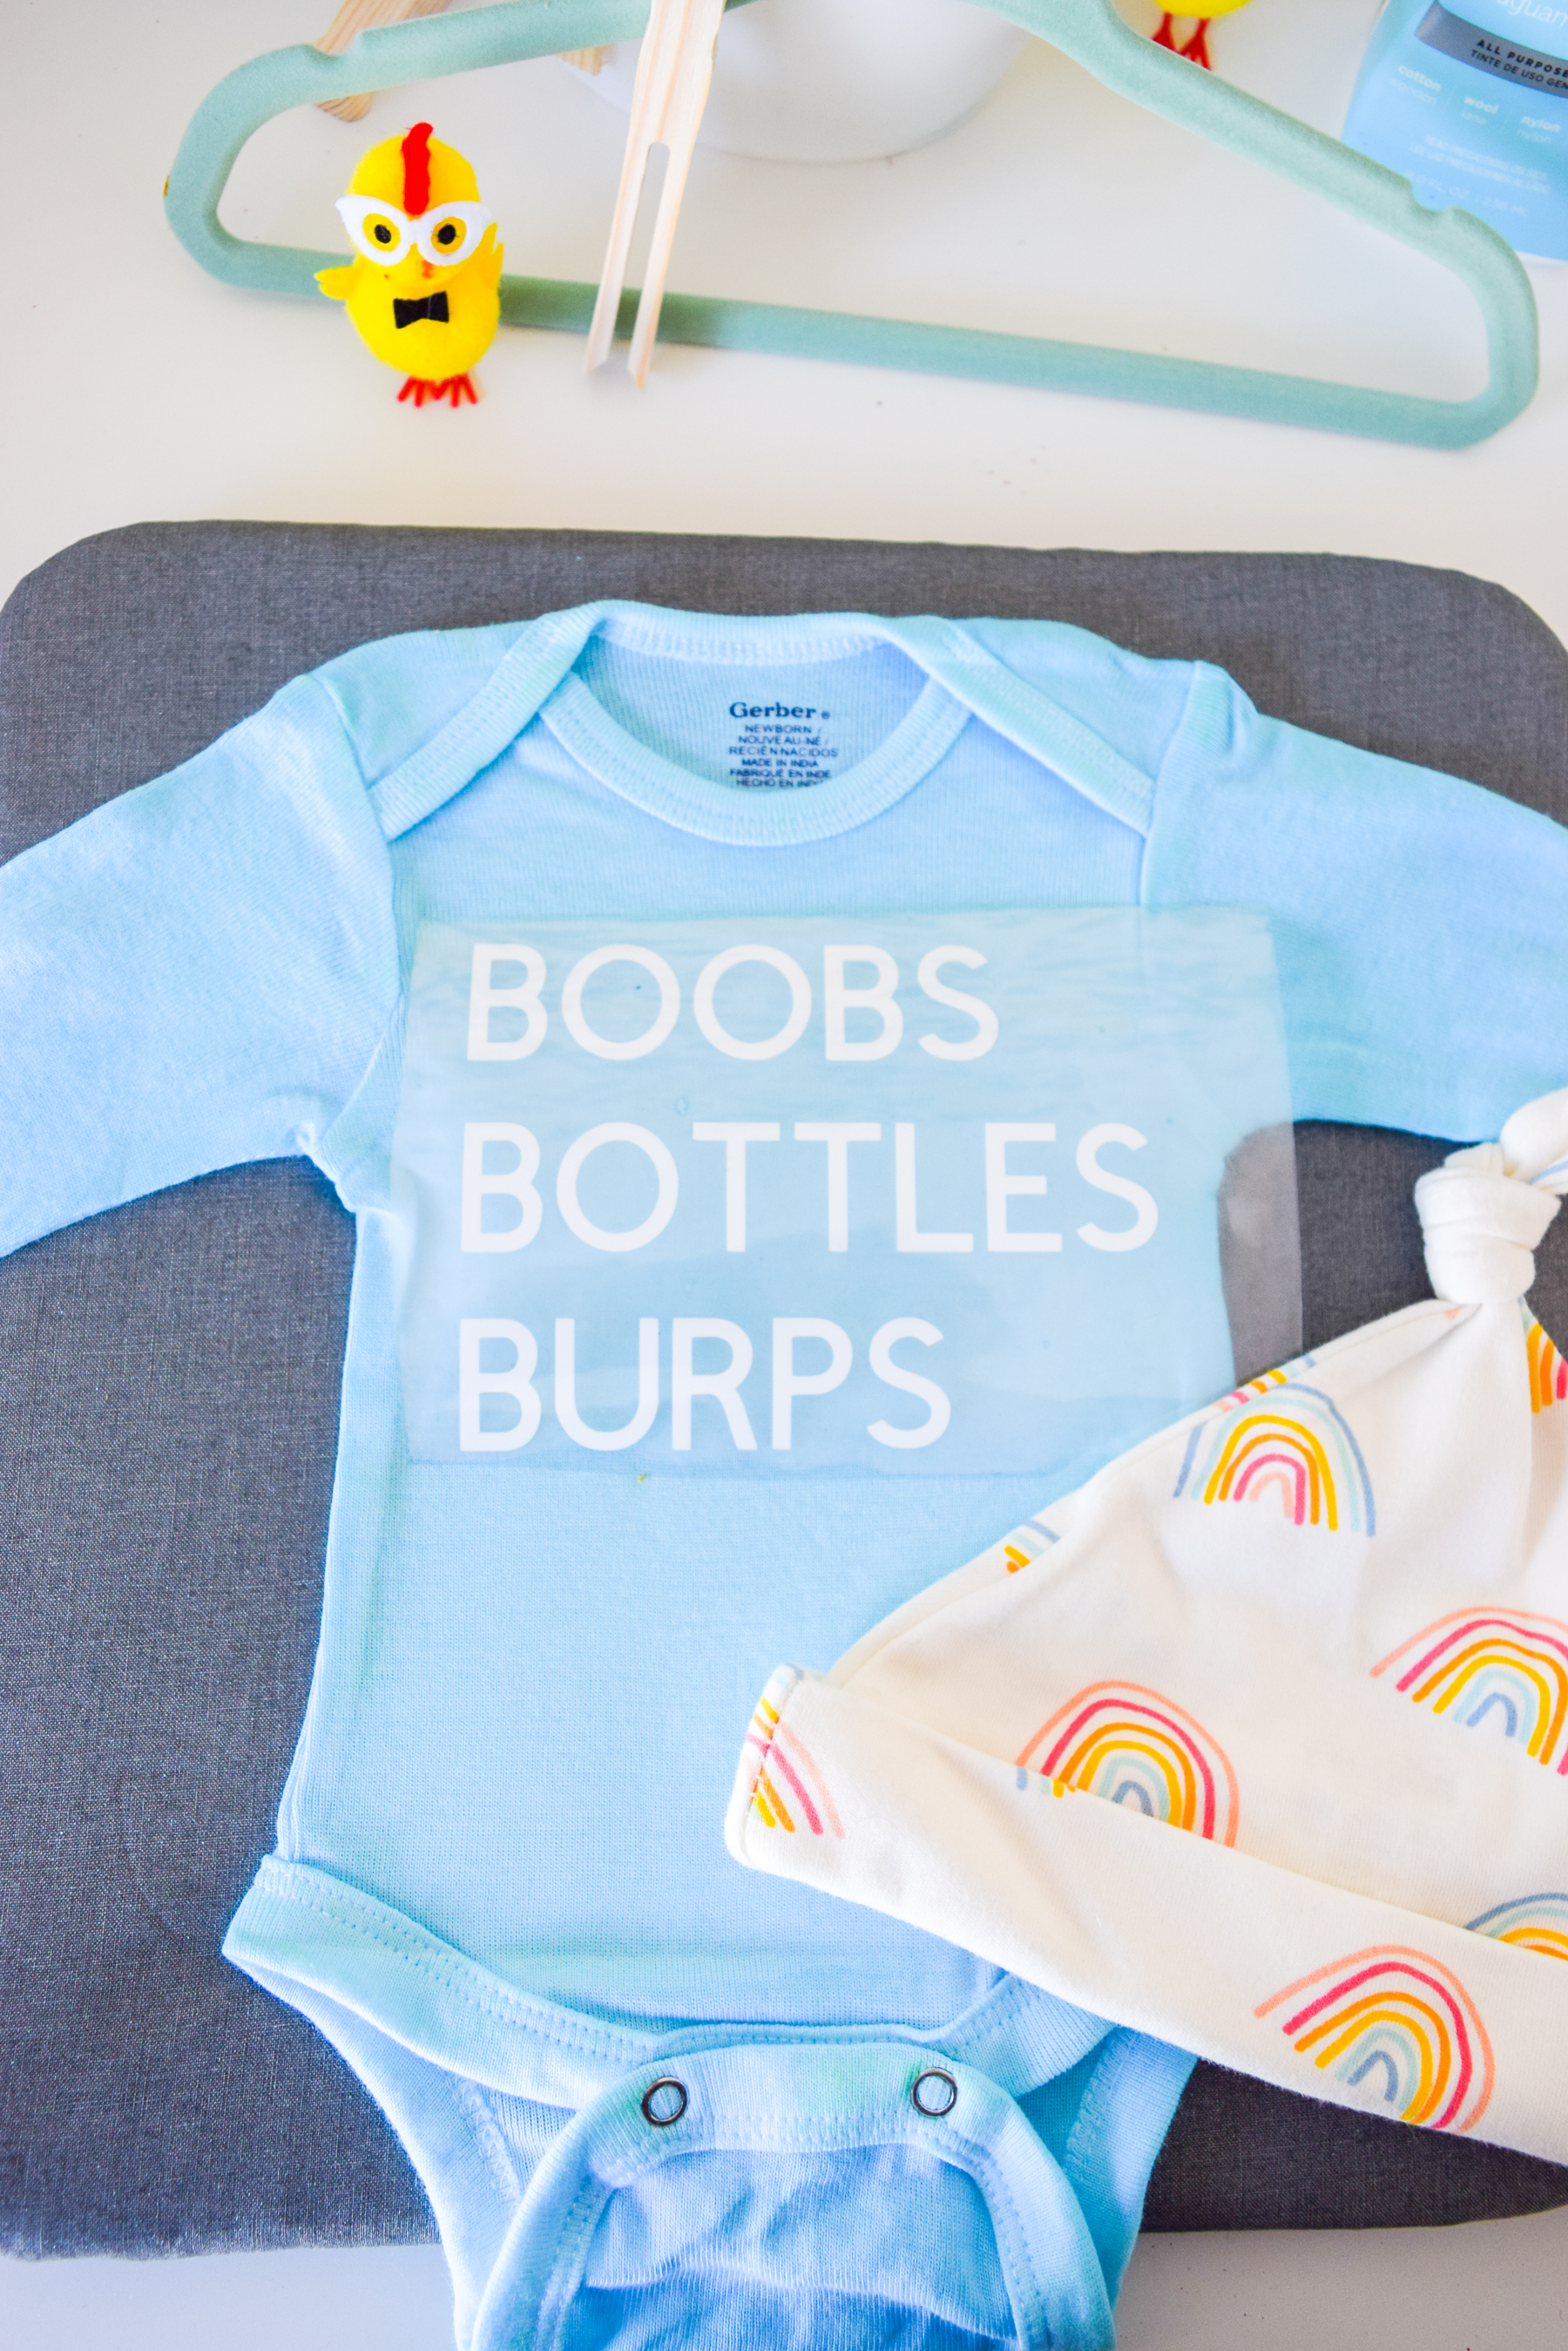 custom dyed baby onesies are how you get around the fact that everything in stores is either blue or pink. Take back the cool with customized baby clothes.